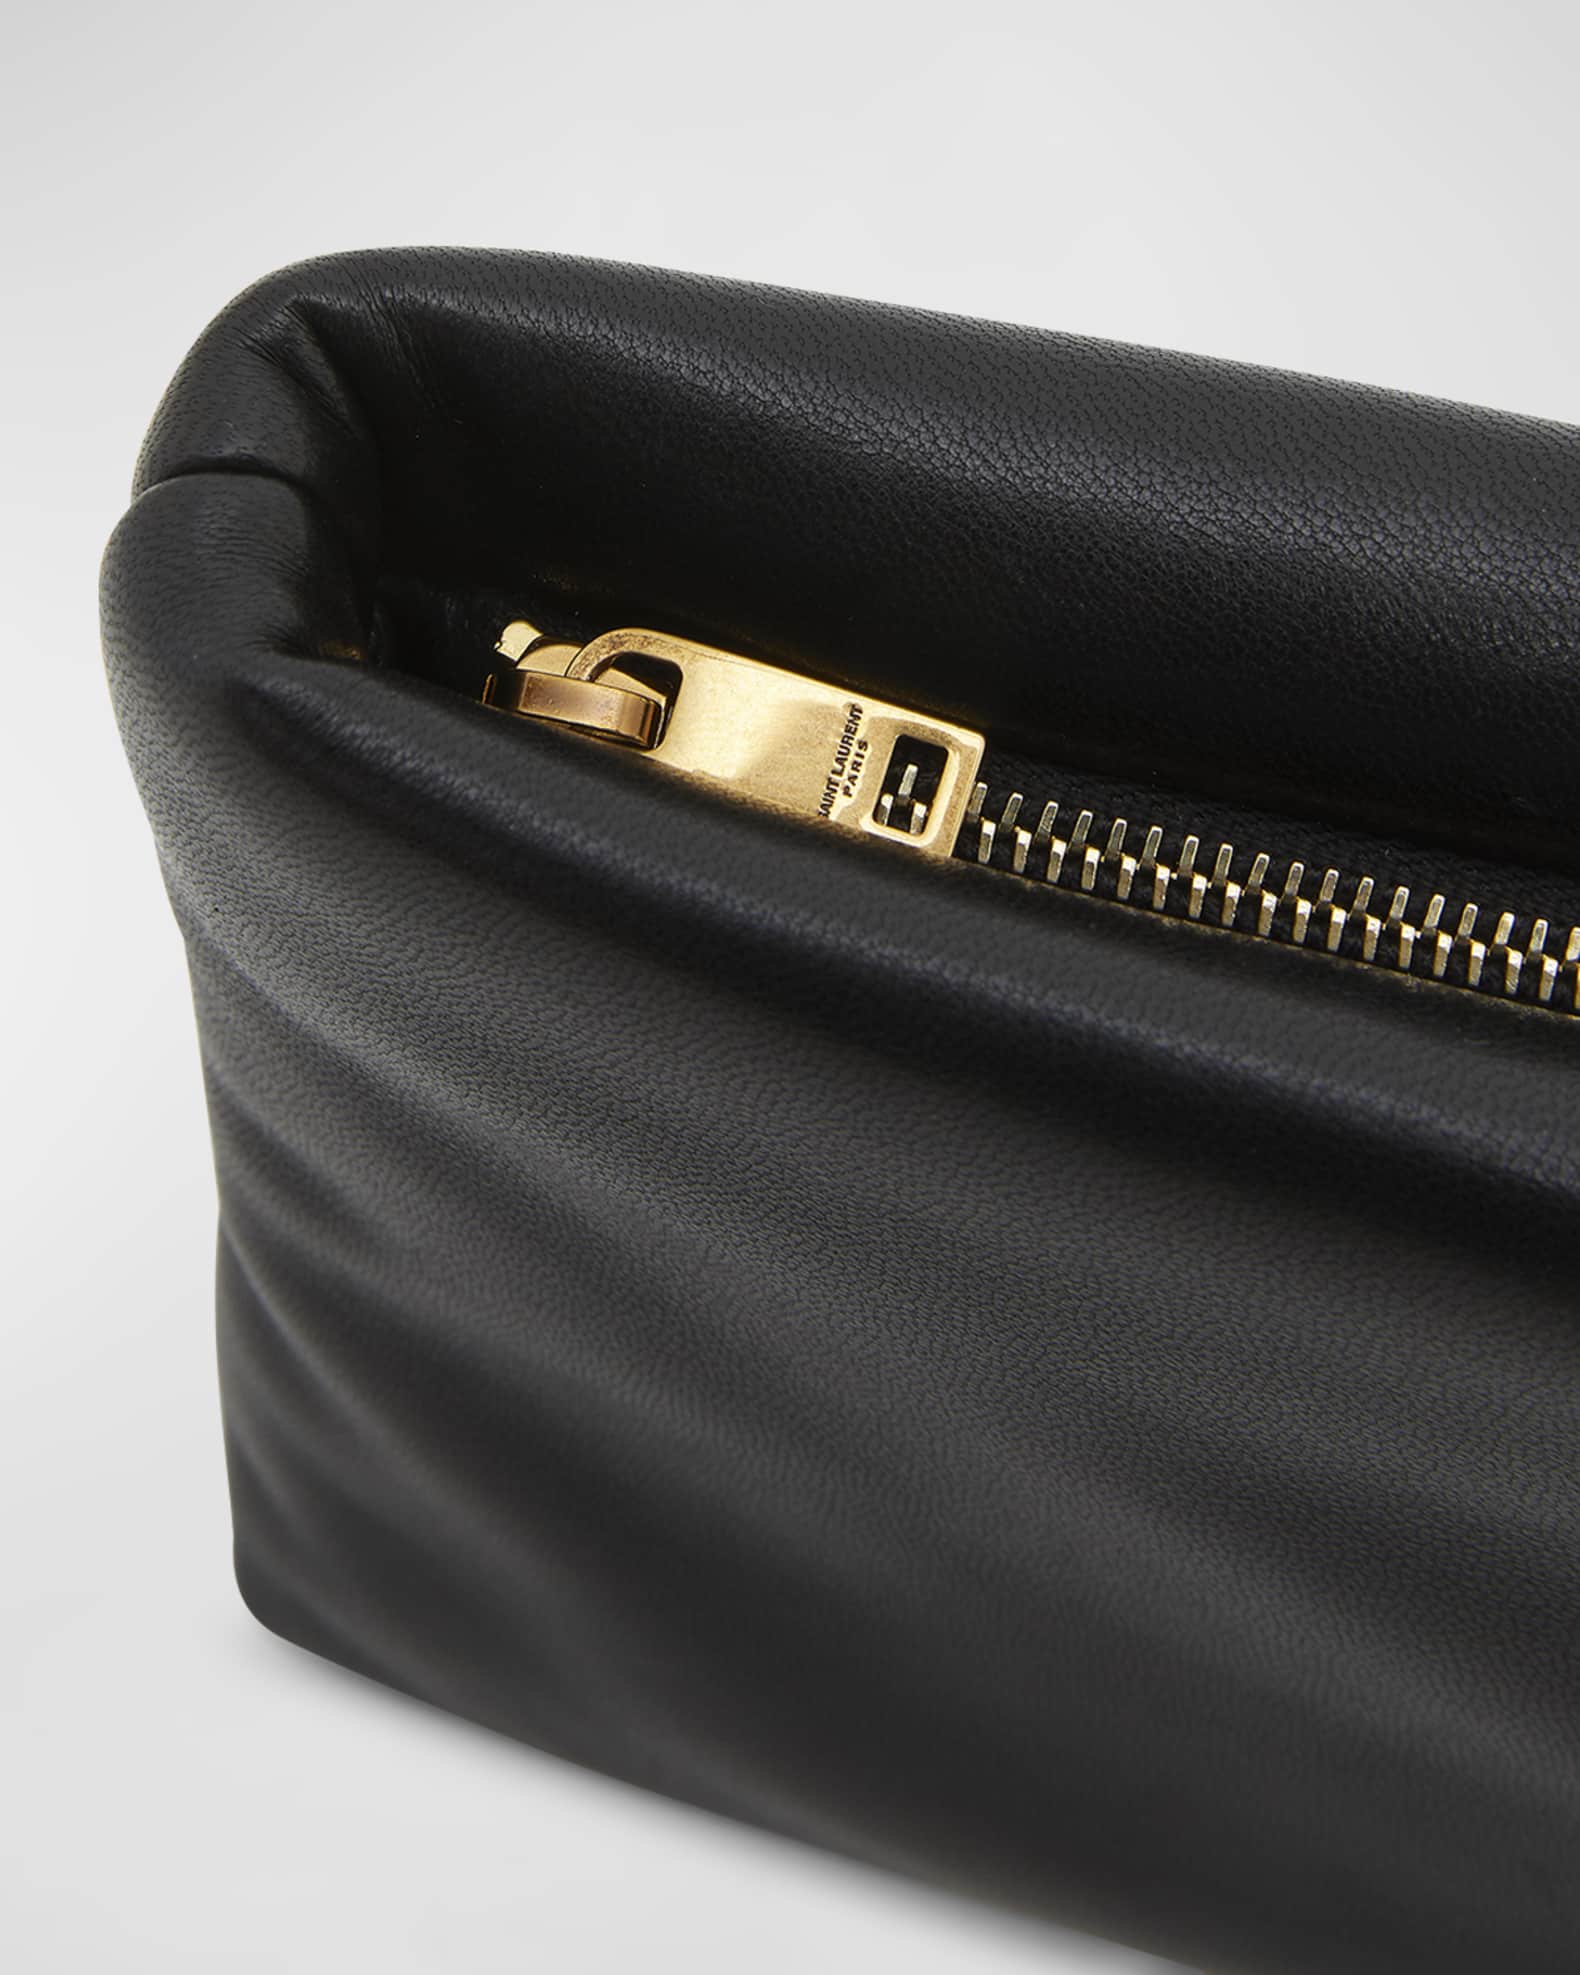 Saint Laurent Calypso Ziptop YSL Clutch Bag in Smooth Padded Leather ...